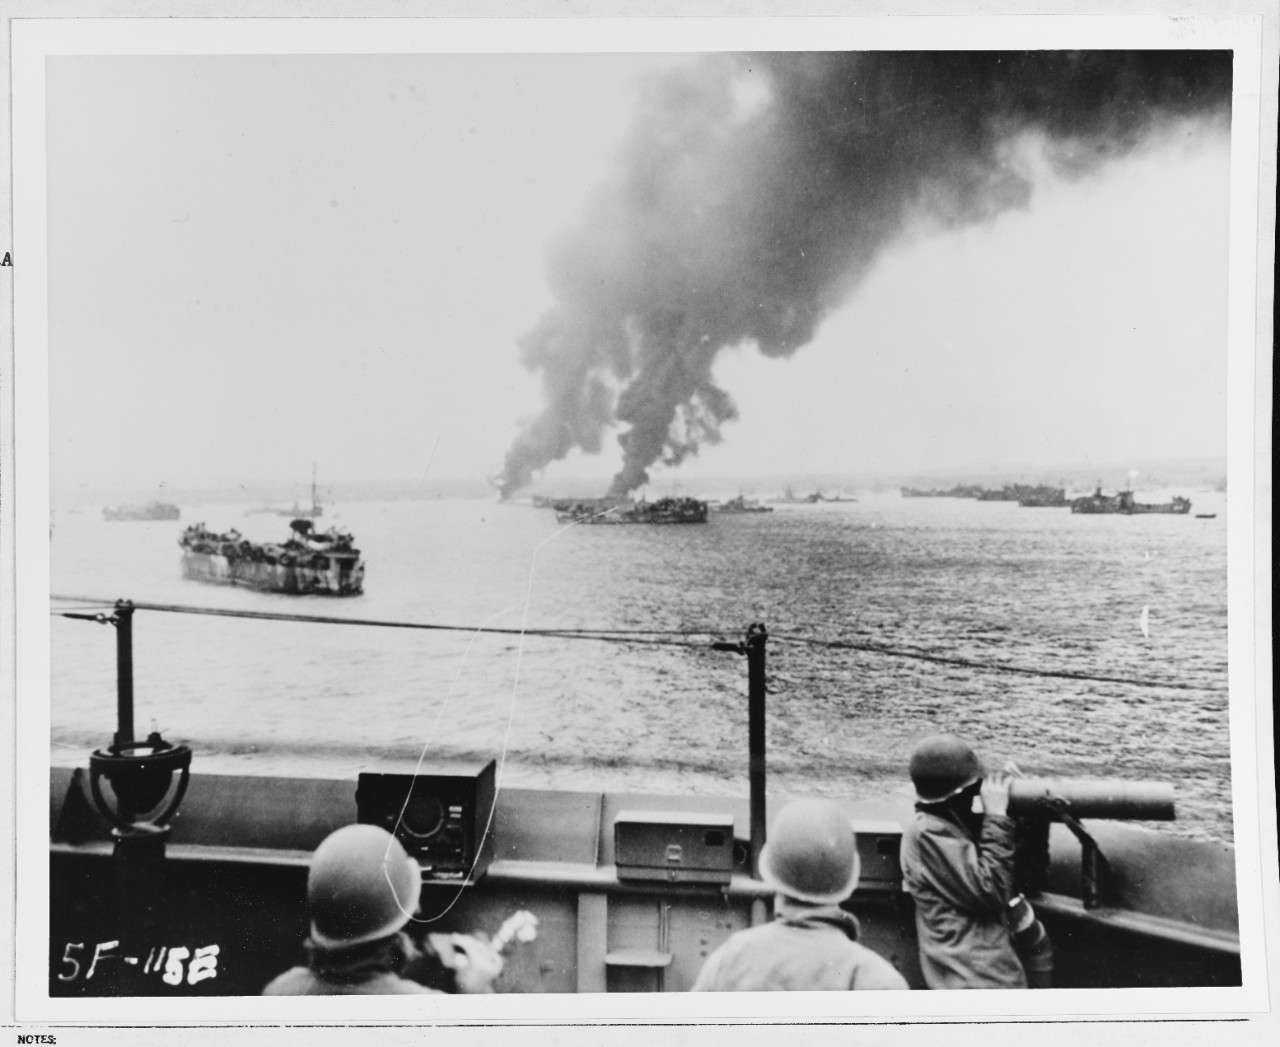 Oil barge on fire off Okinawa, Japan, after air raid, 1945.